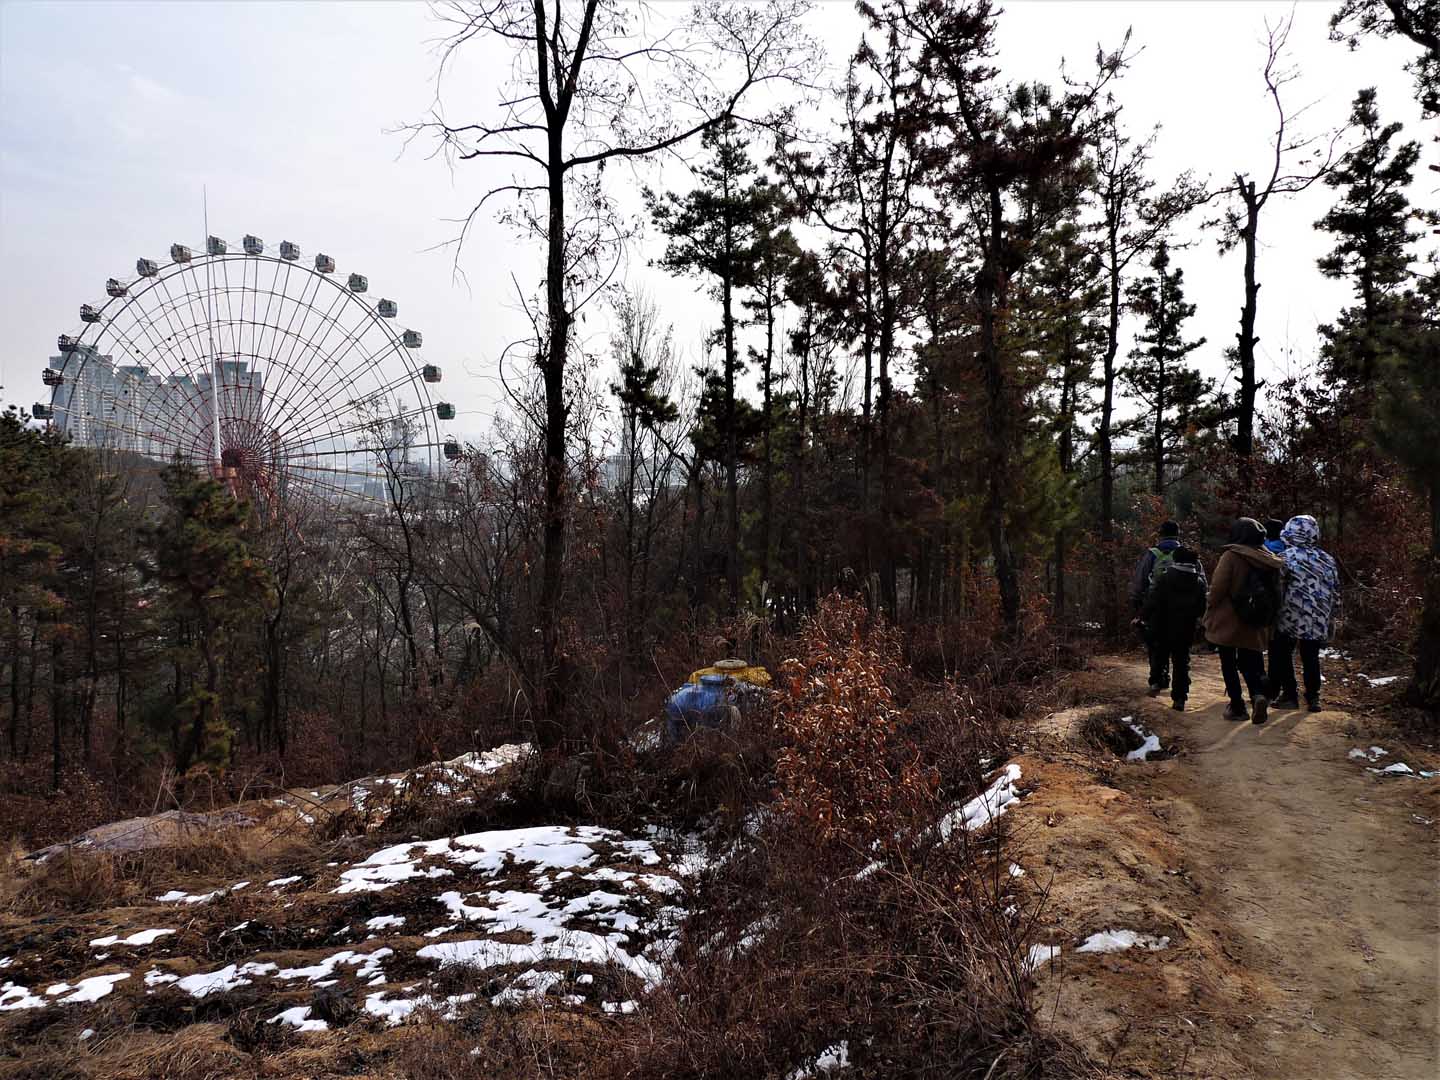 picure of OuSeongEeSan with a ferris wheel visible in the background